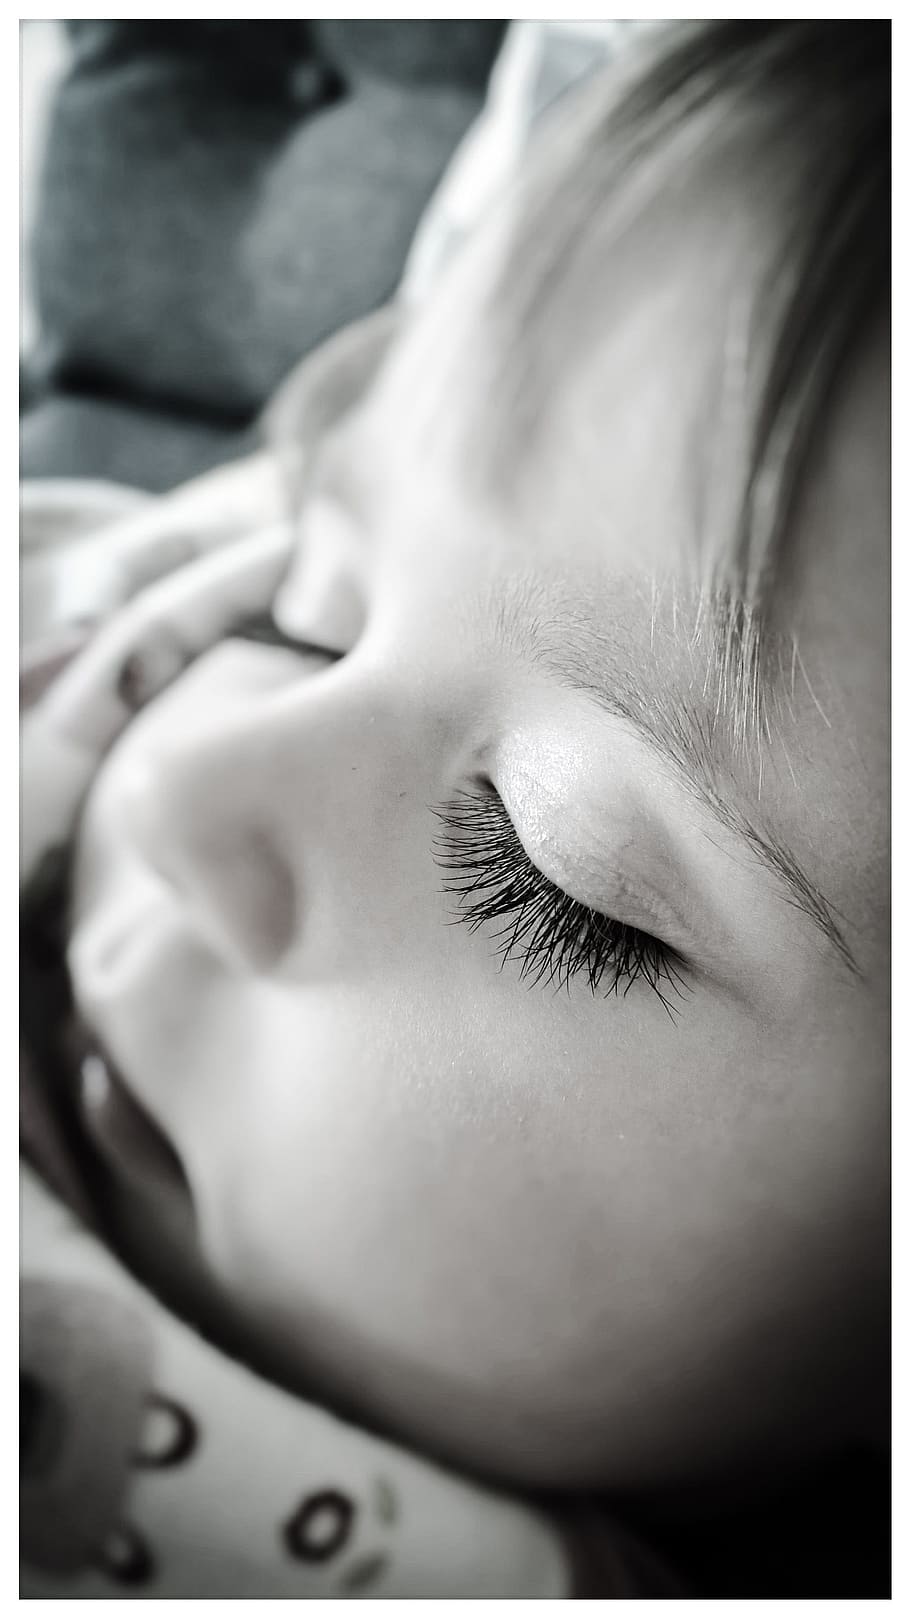 grayscale photography, baby, sleeping, grayscale, photography, child, girl, toddler, eye lashes, black white